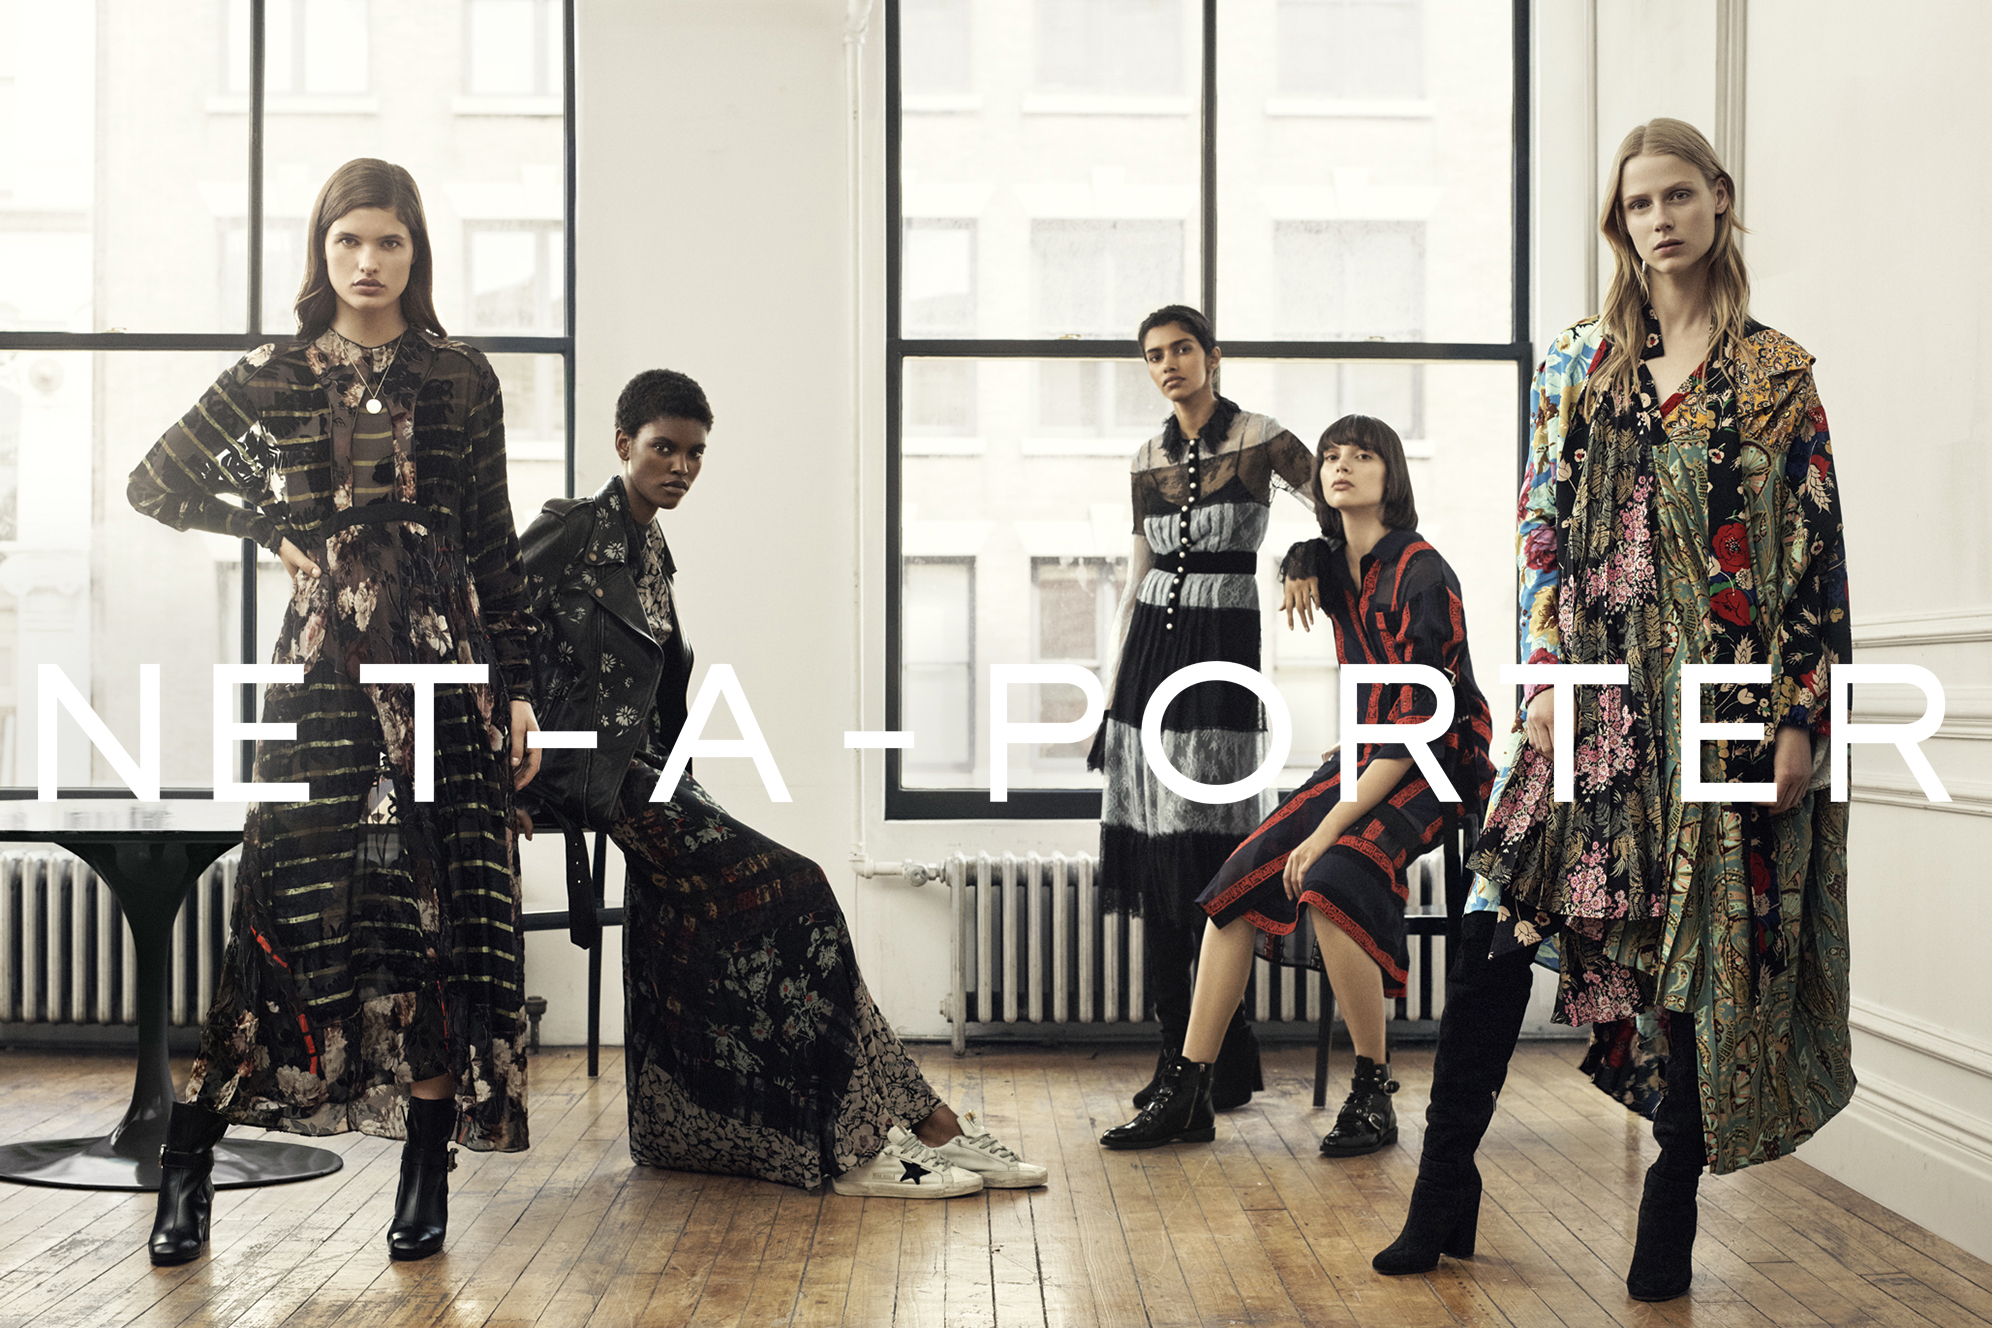 Who Are the Models in Net-A-Porter's Fall Campaign? - Daily Front Row